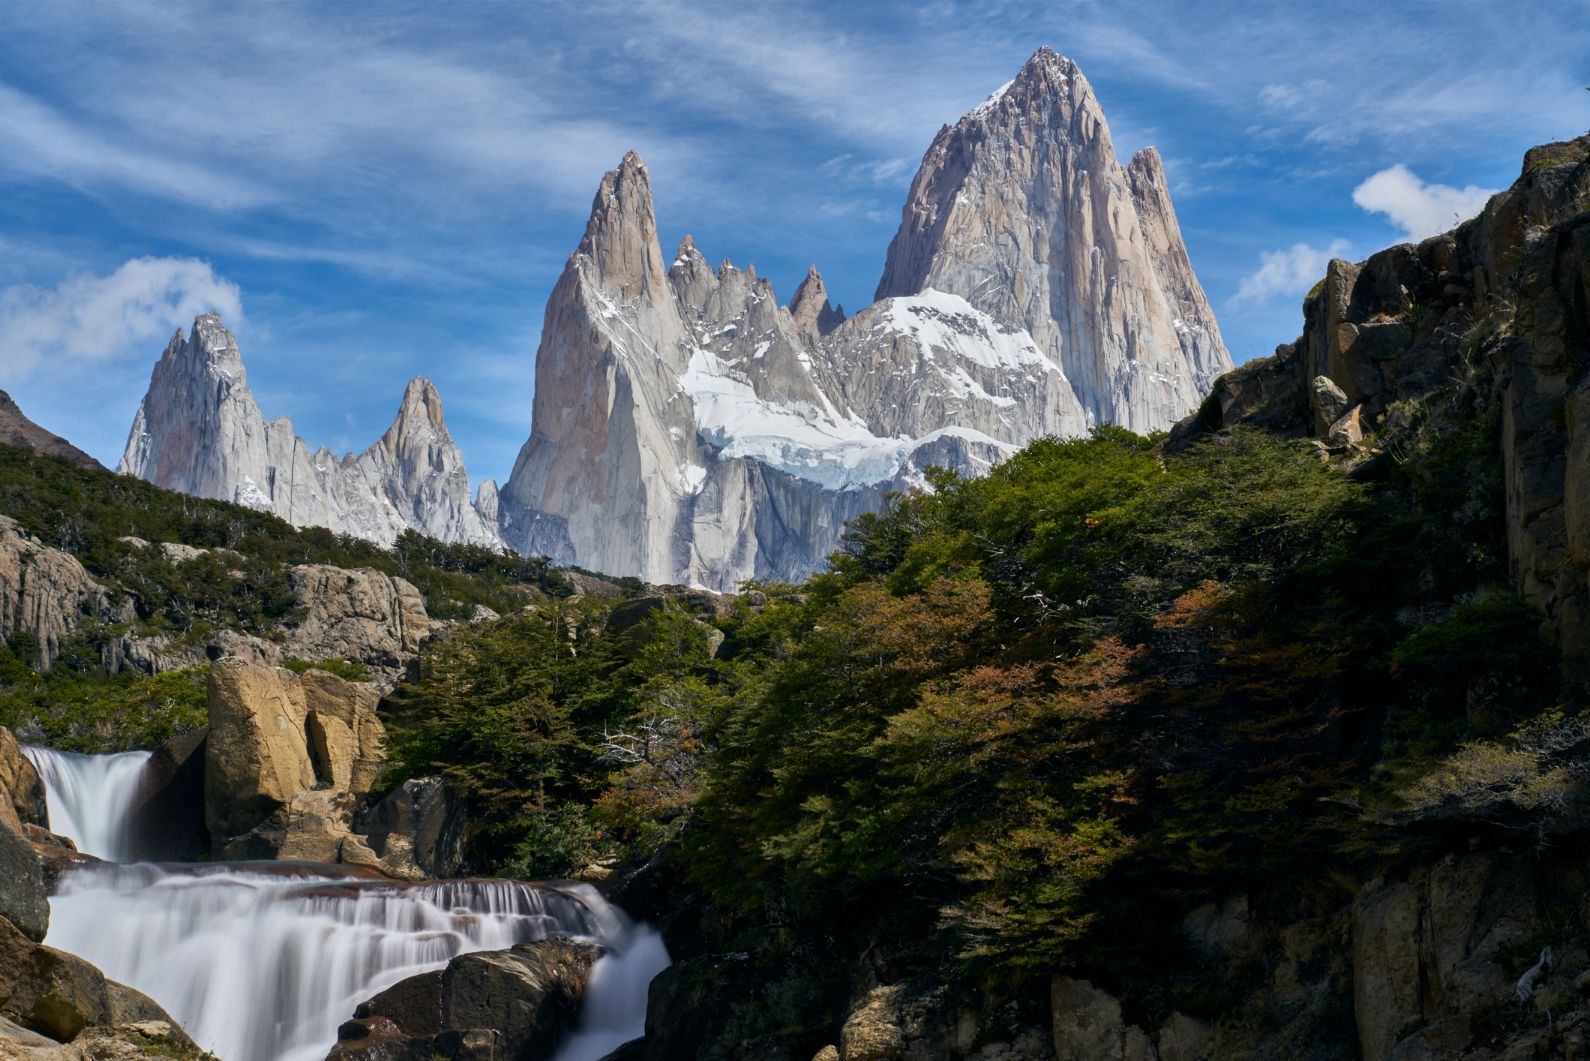 A waterfall overlooking the iconic Mount Fitz Roy peaks in El Chaltén, in the Santa Cruz Province of Argentina